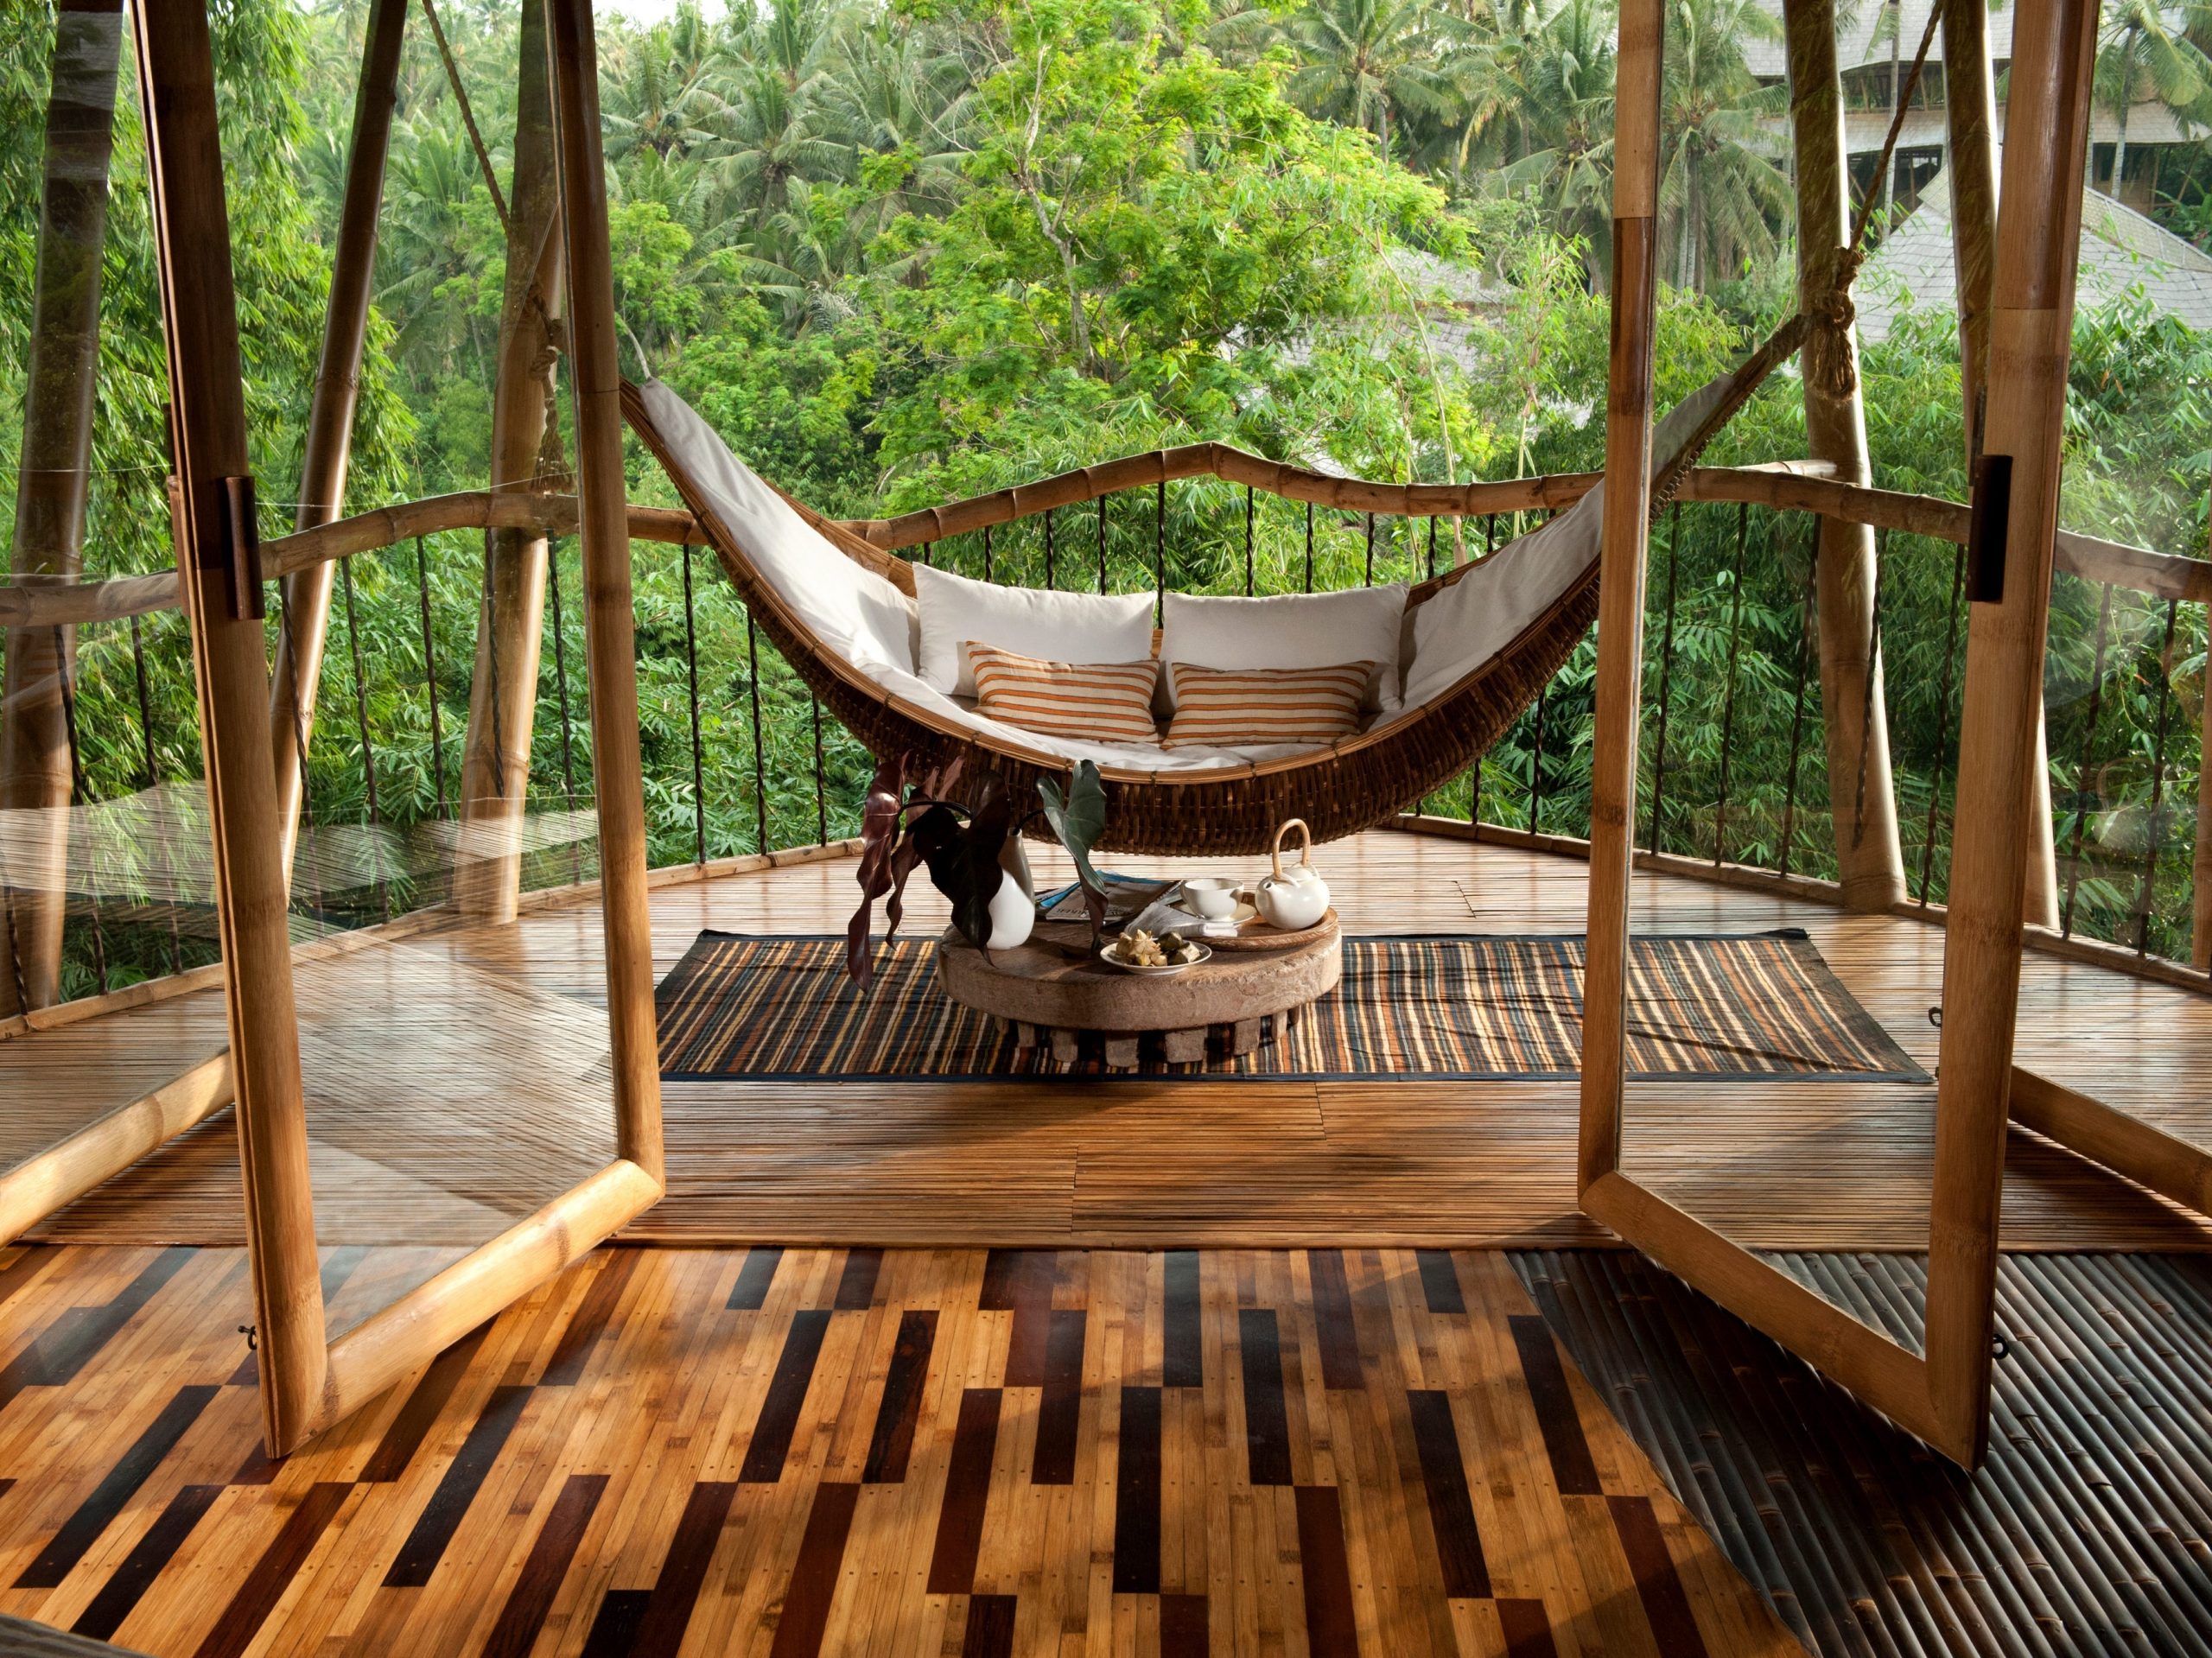 An Ibuku living space blends interior and exterior and included a hammock outside